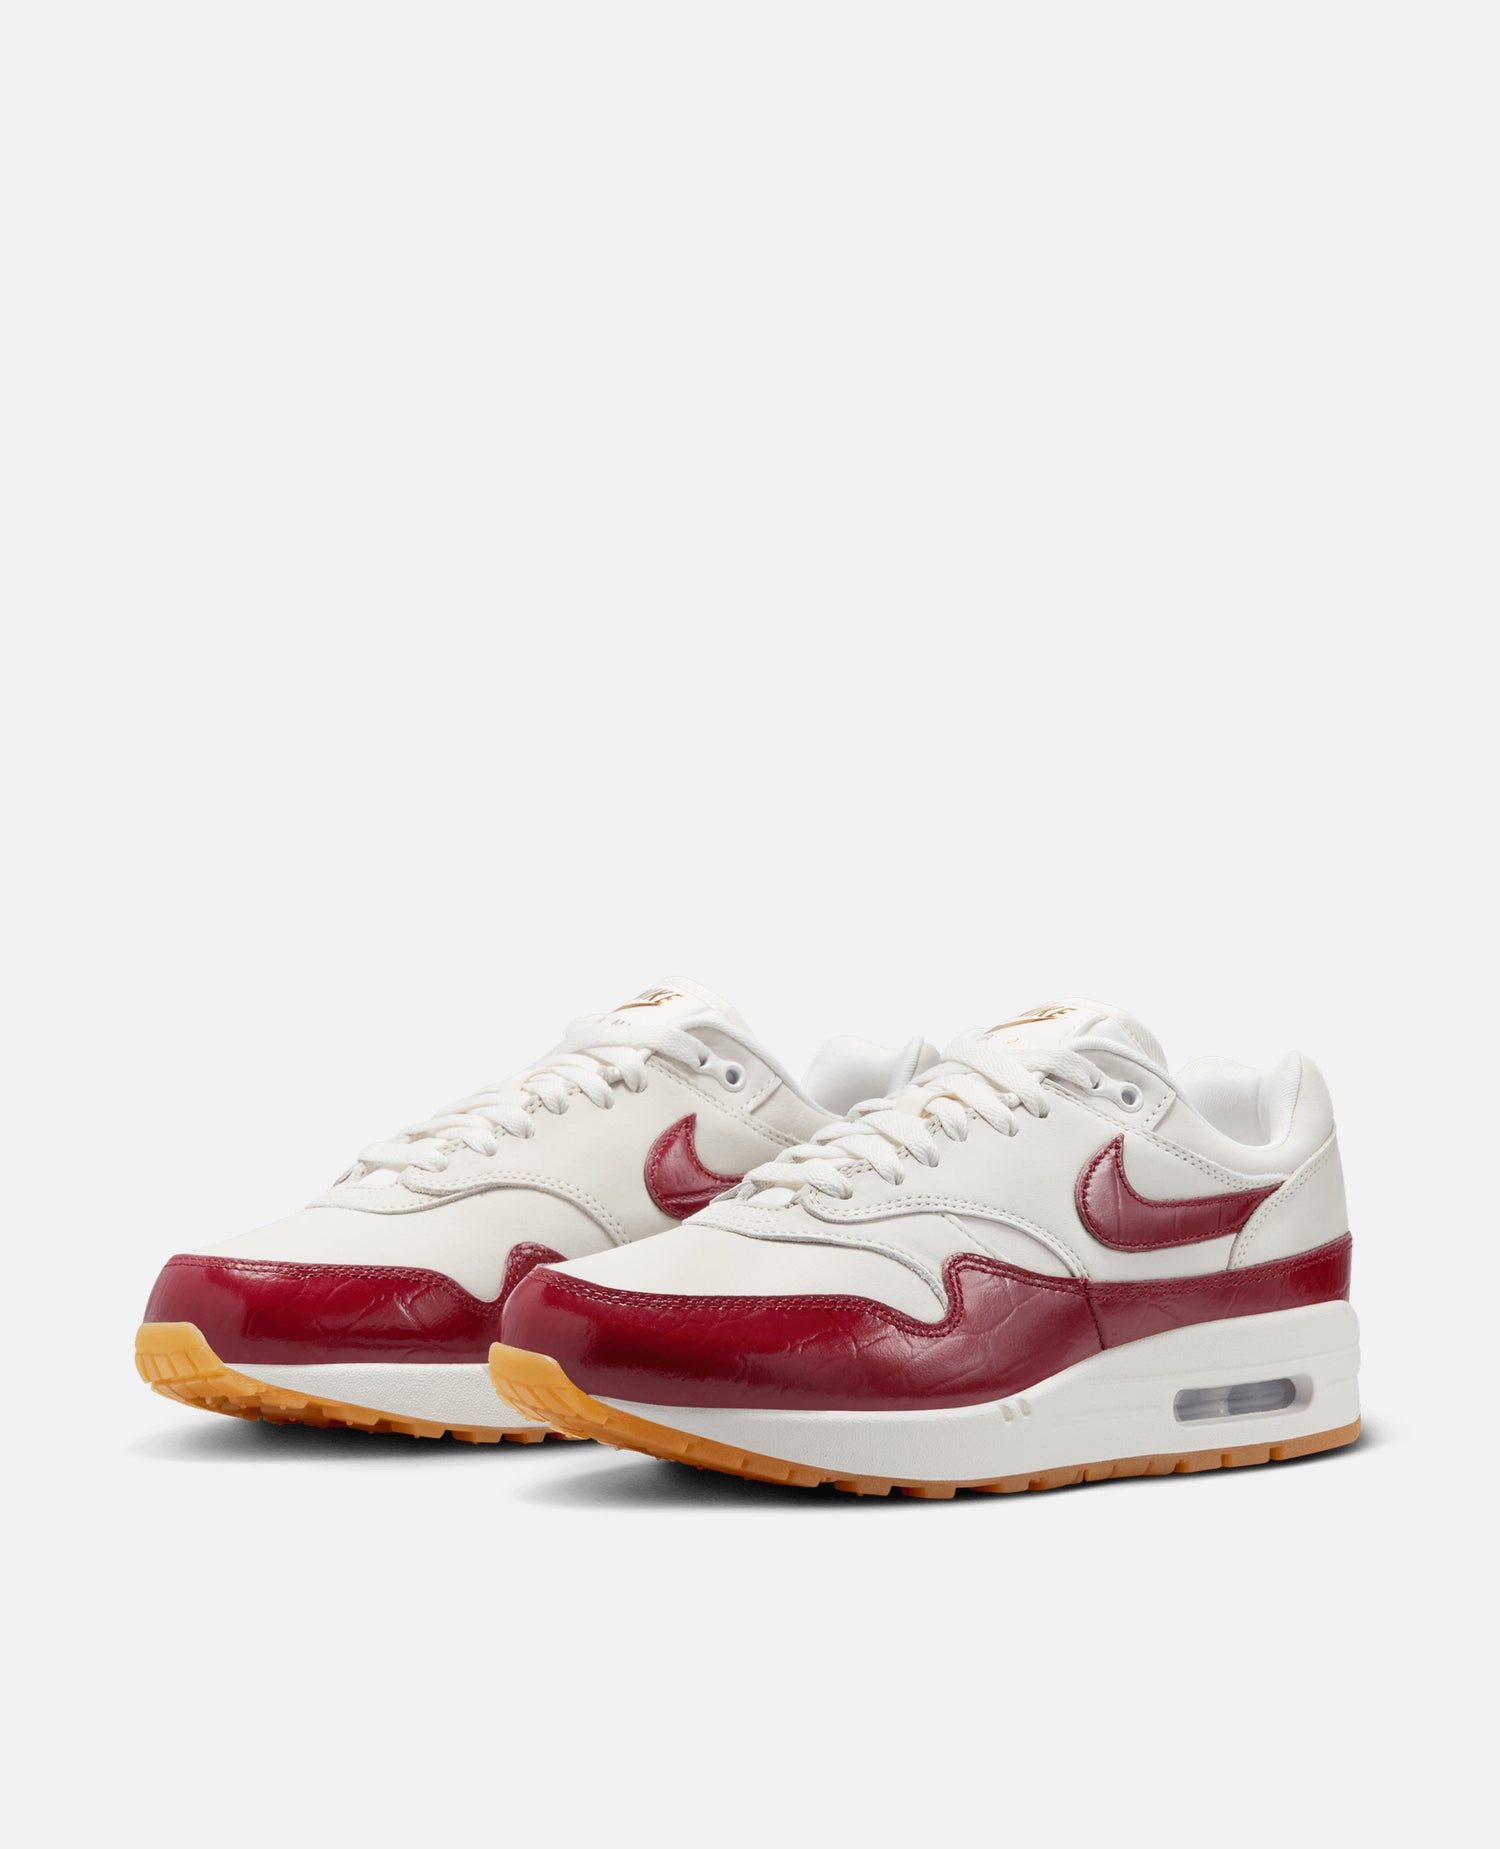 Nike Femme Air Max 1 Lx (Voile/Team Rouge-Voile-Gomme Marron Clair)